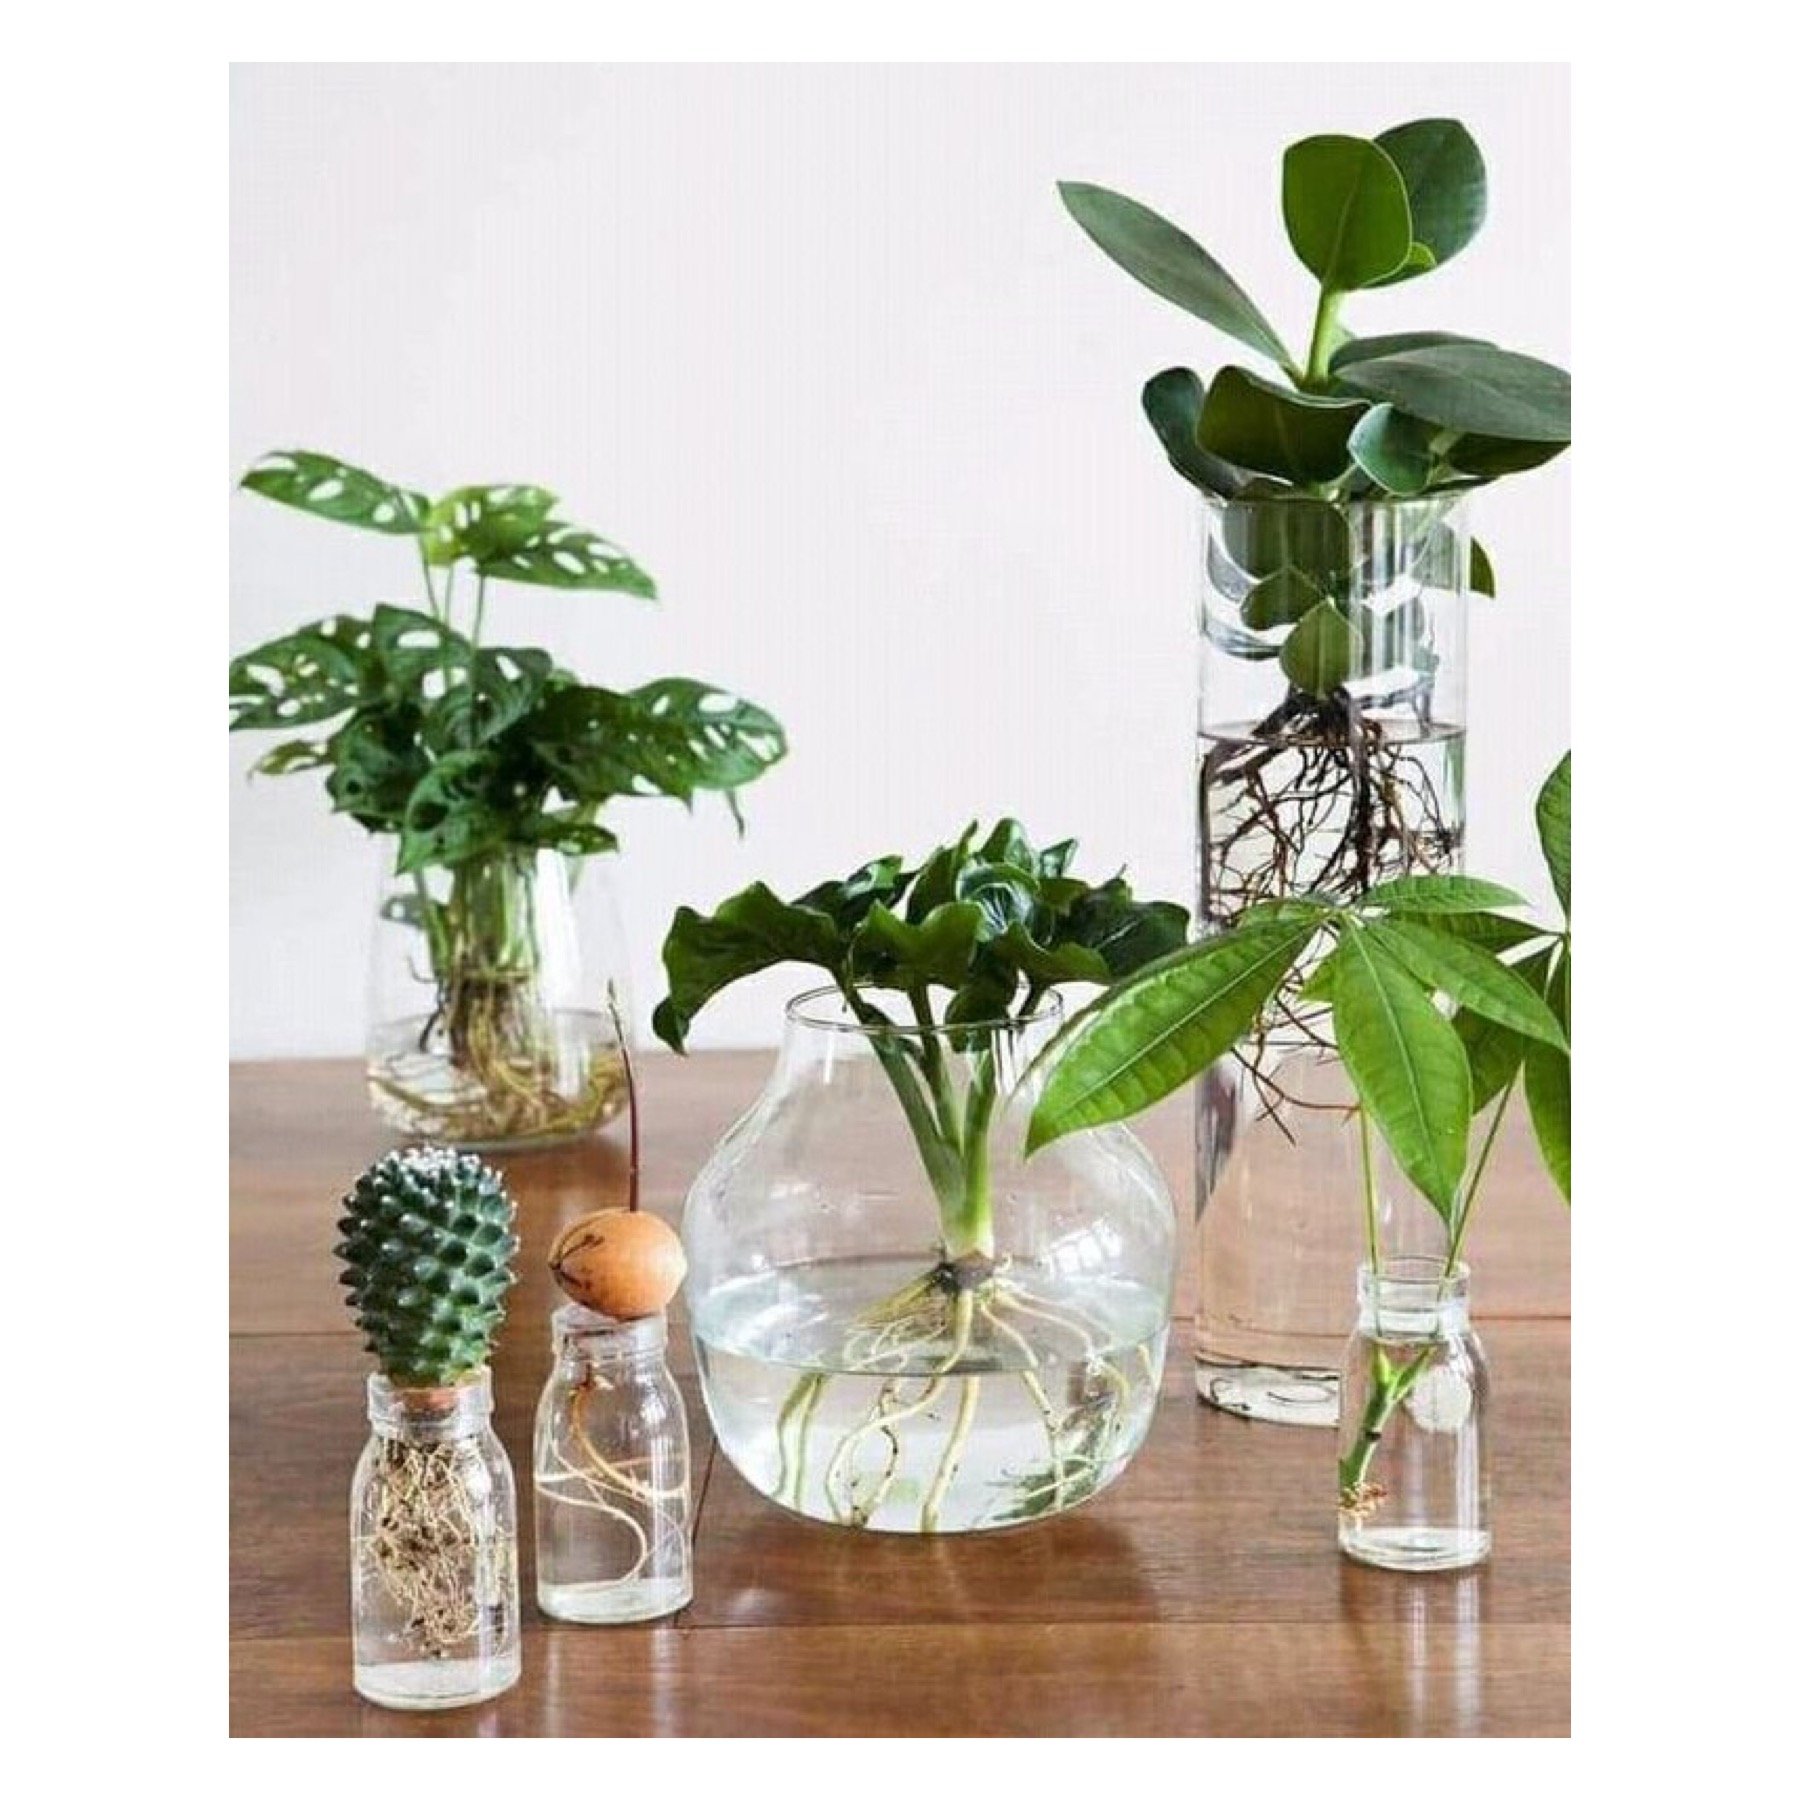 P R O P A G A T I O N .

I&rsquo;ve been collecting glassware for years: from vintage decorative glass to quirky soda bottles and everything that has struck my fancy in between. Always moving them in and out of everchanging windowsill landscapes, I u